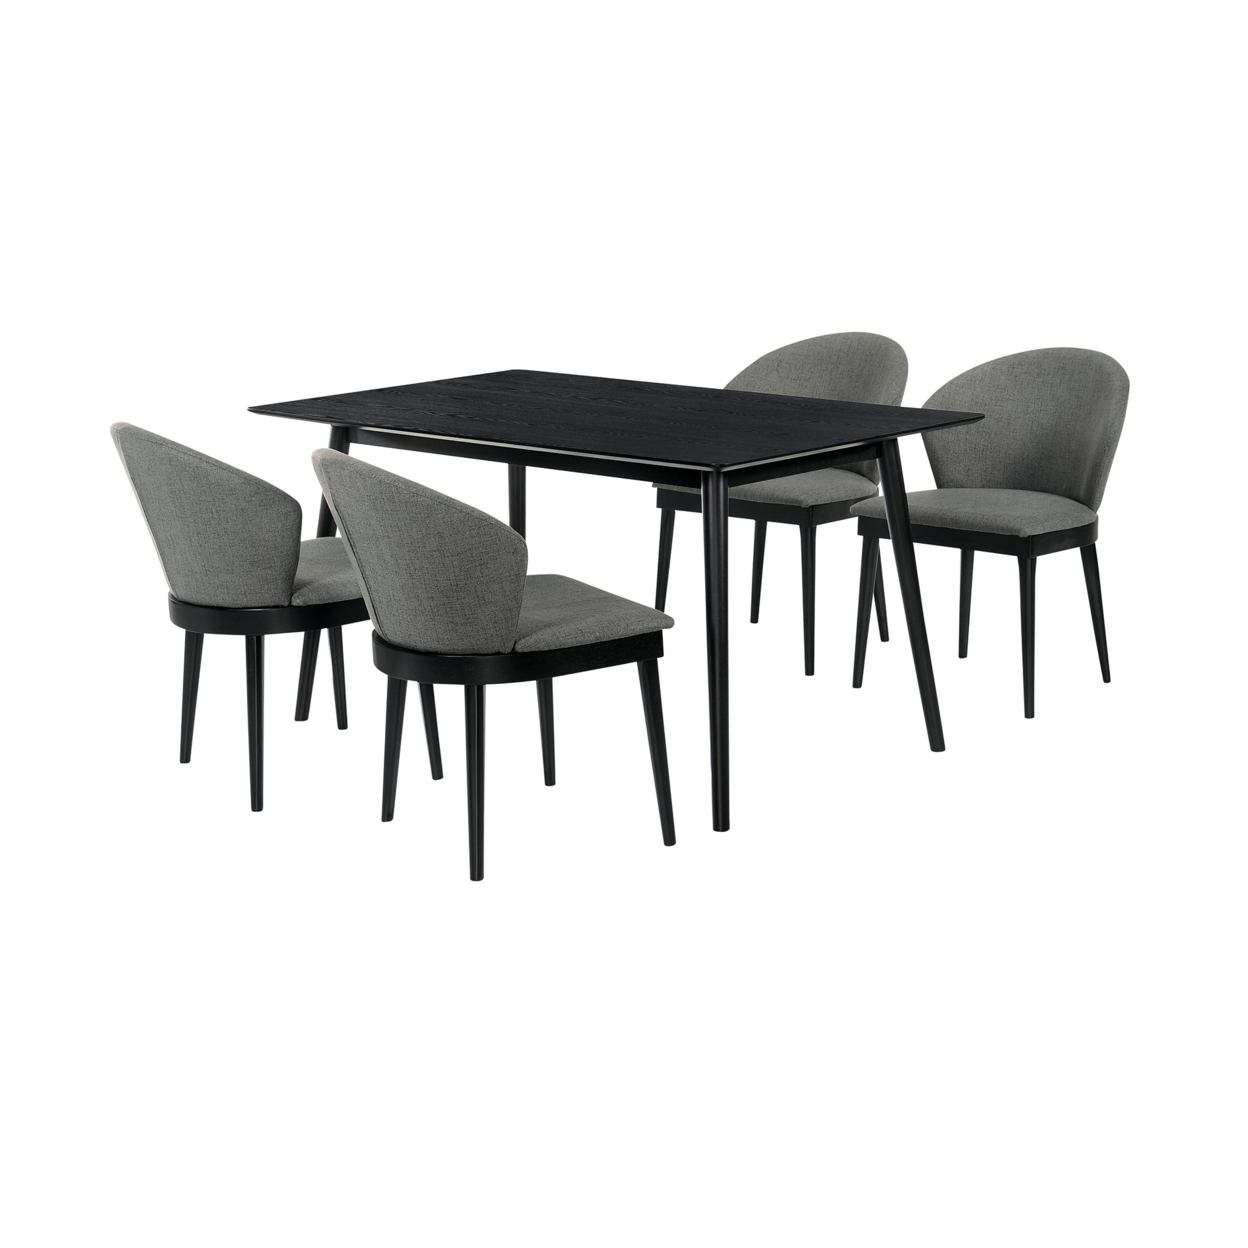 5 Piece Dining Chair With Curved Shell Back Chair, Black And Gray- Saltoro Sherpi